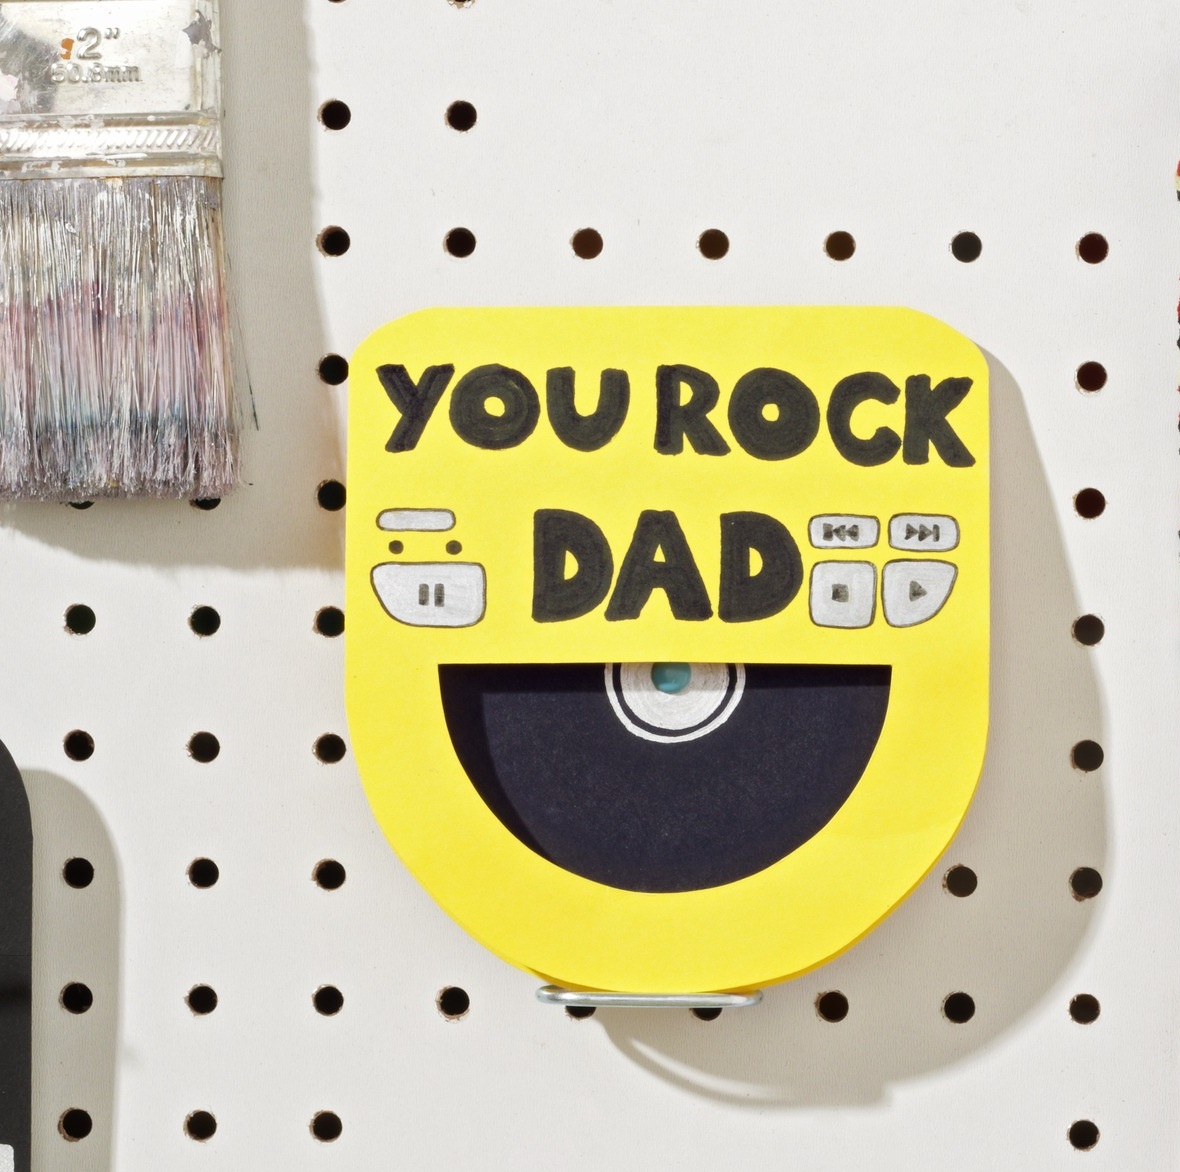 Cards For Dads Birthday Ideas Fathers Day Crafts For Kids 21 Too Cute Gift Ideas For Dad Parents